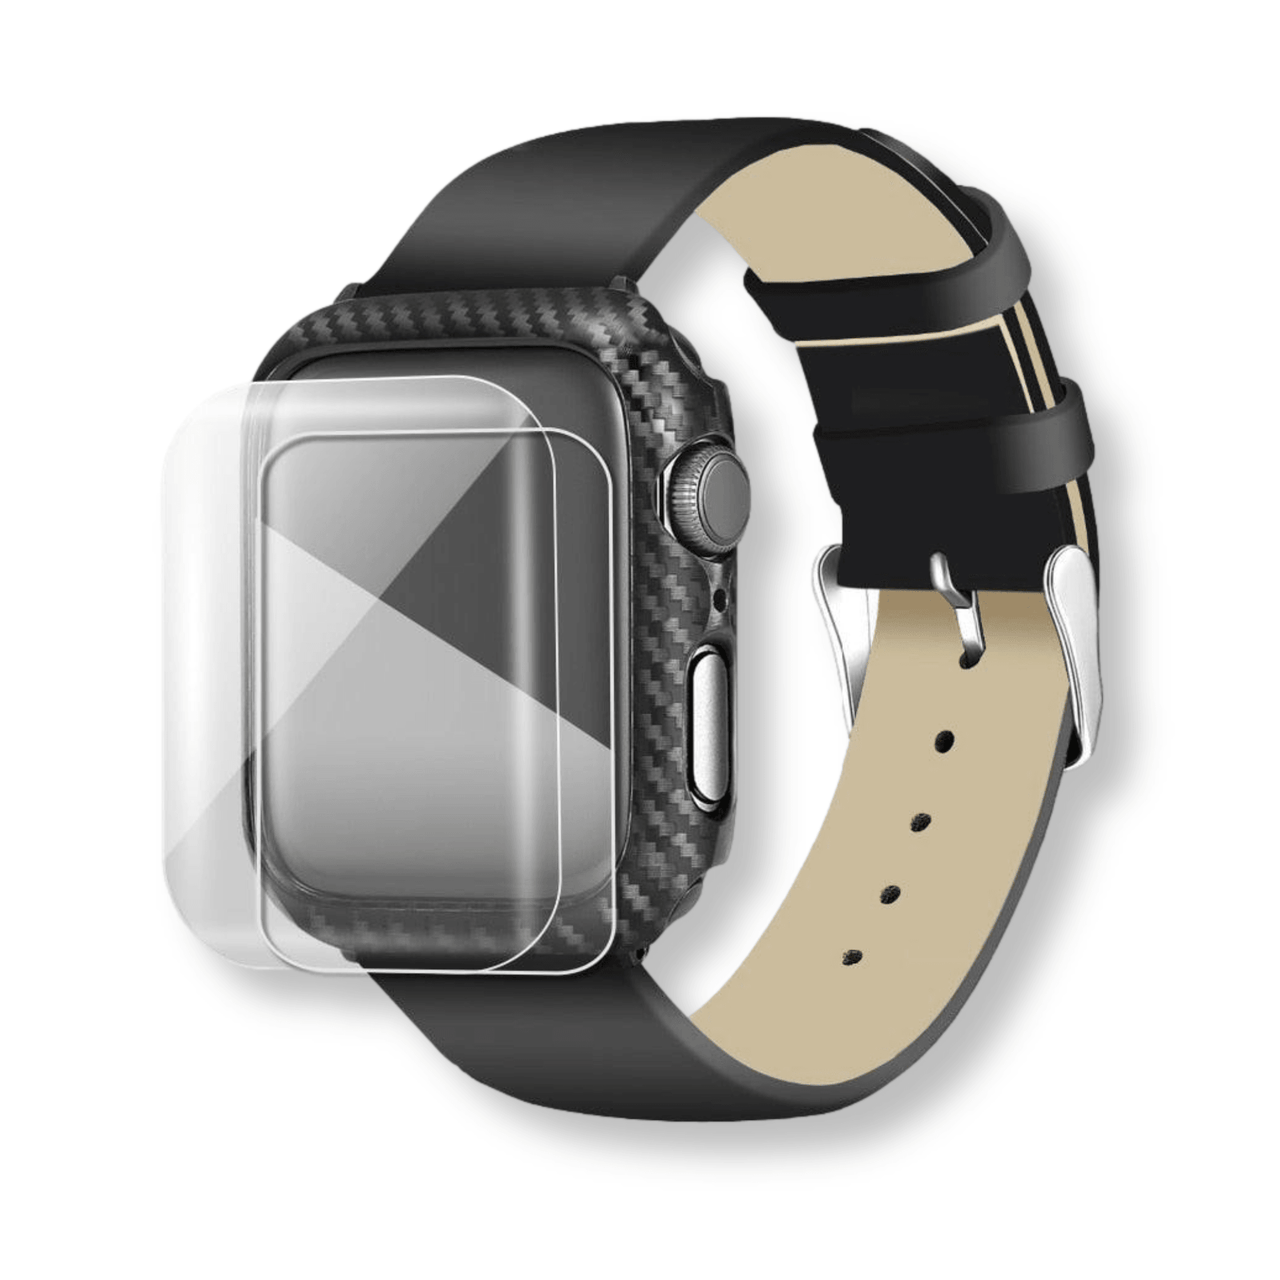 Cover Case For Apple Watch - watchband.direct